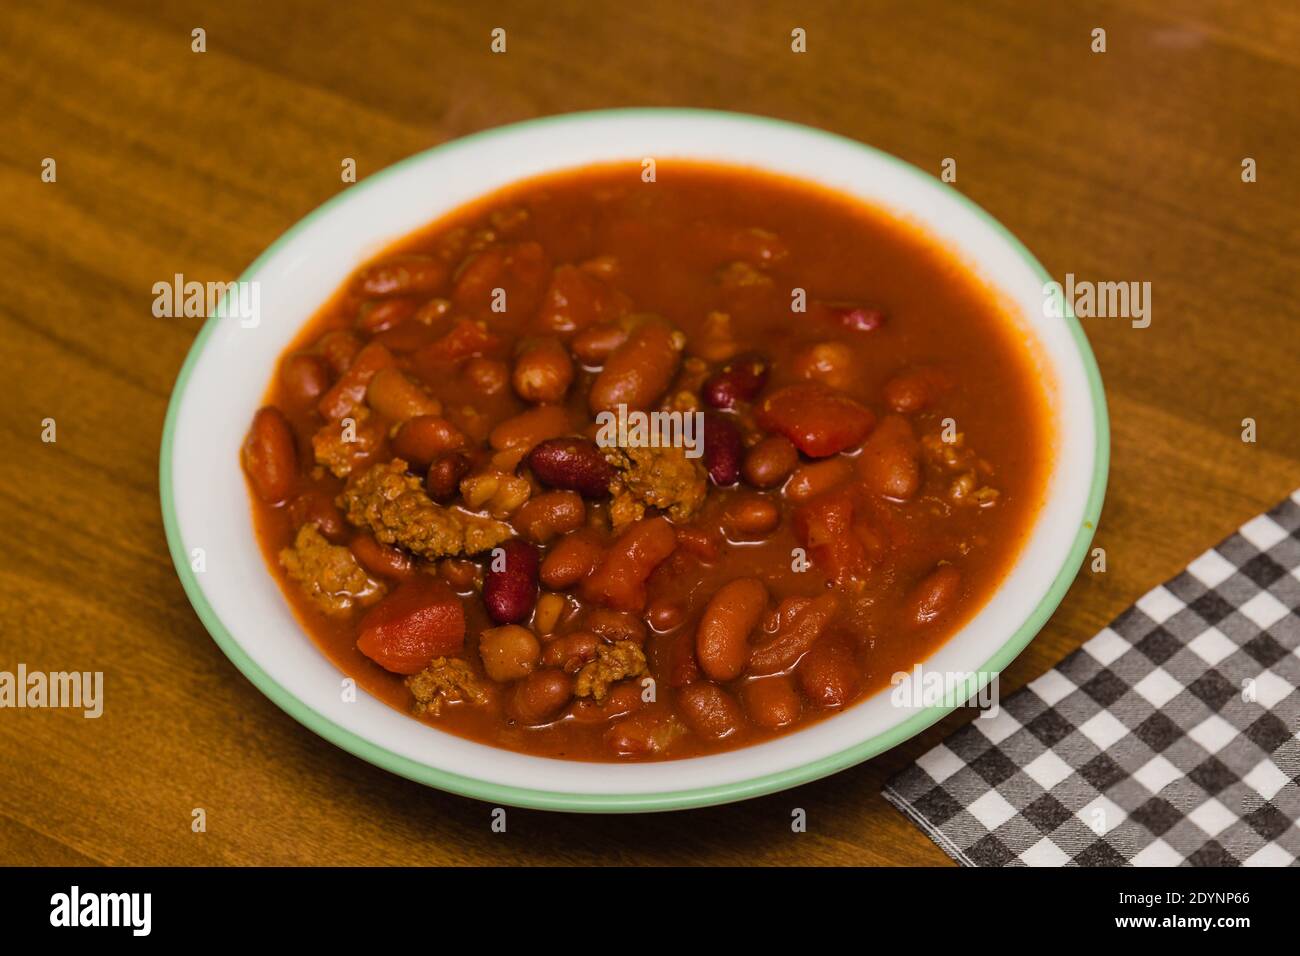 bowl of homemade chili on the table ready for your dining pleasure Stock Photo